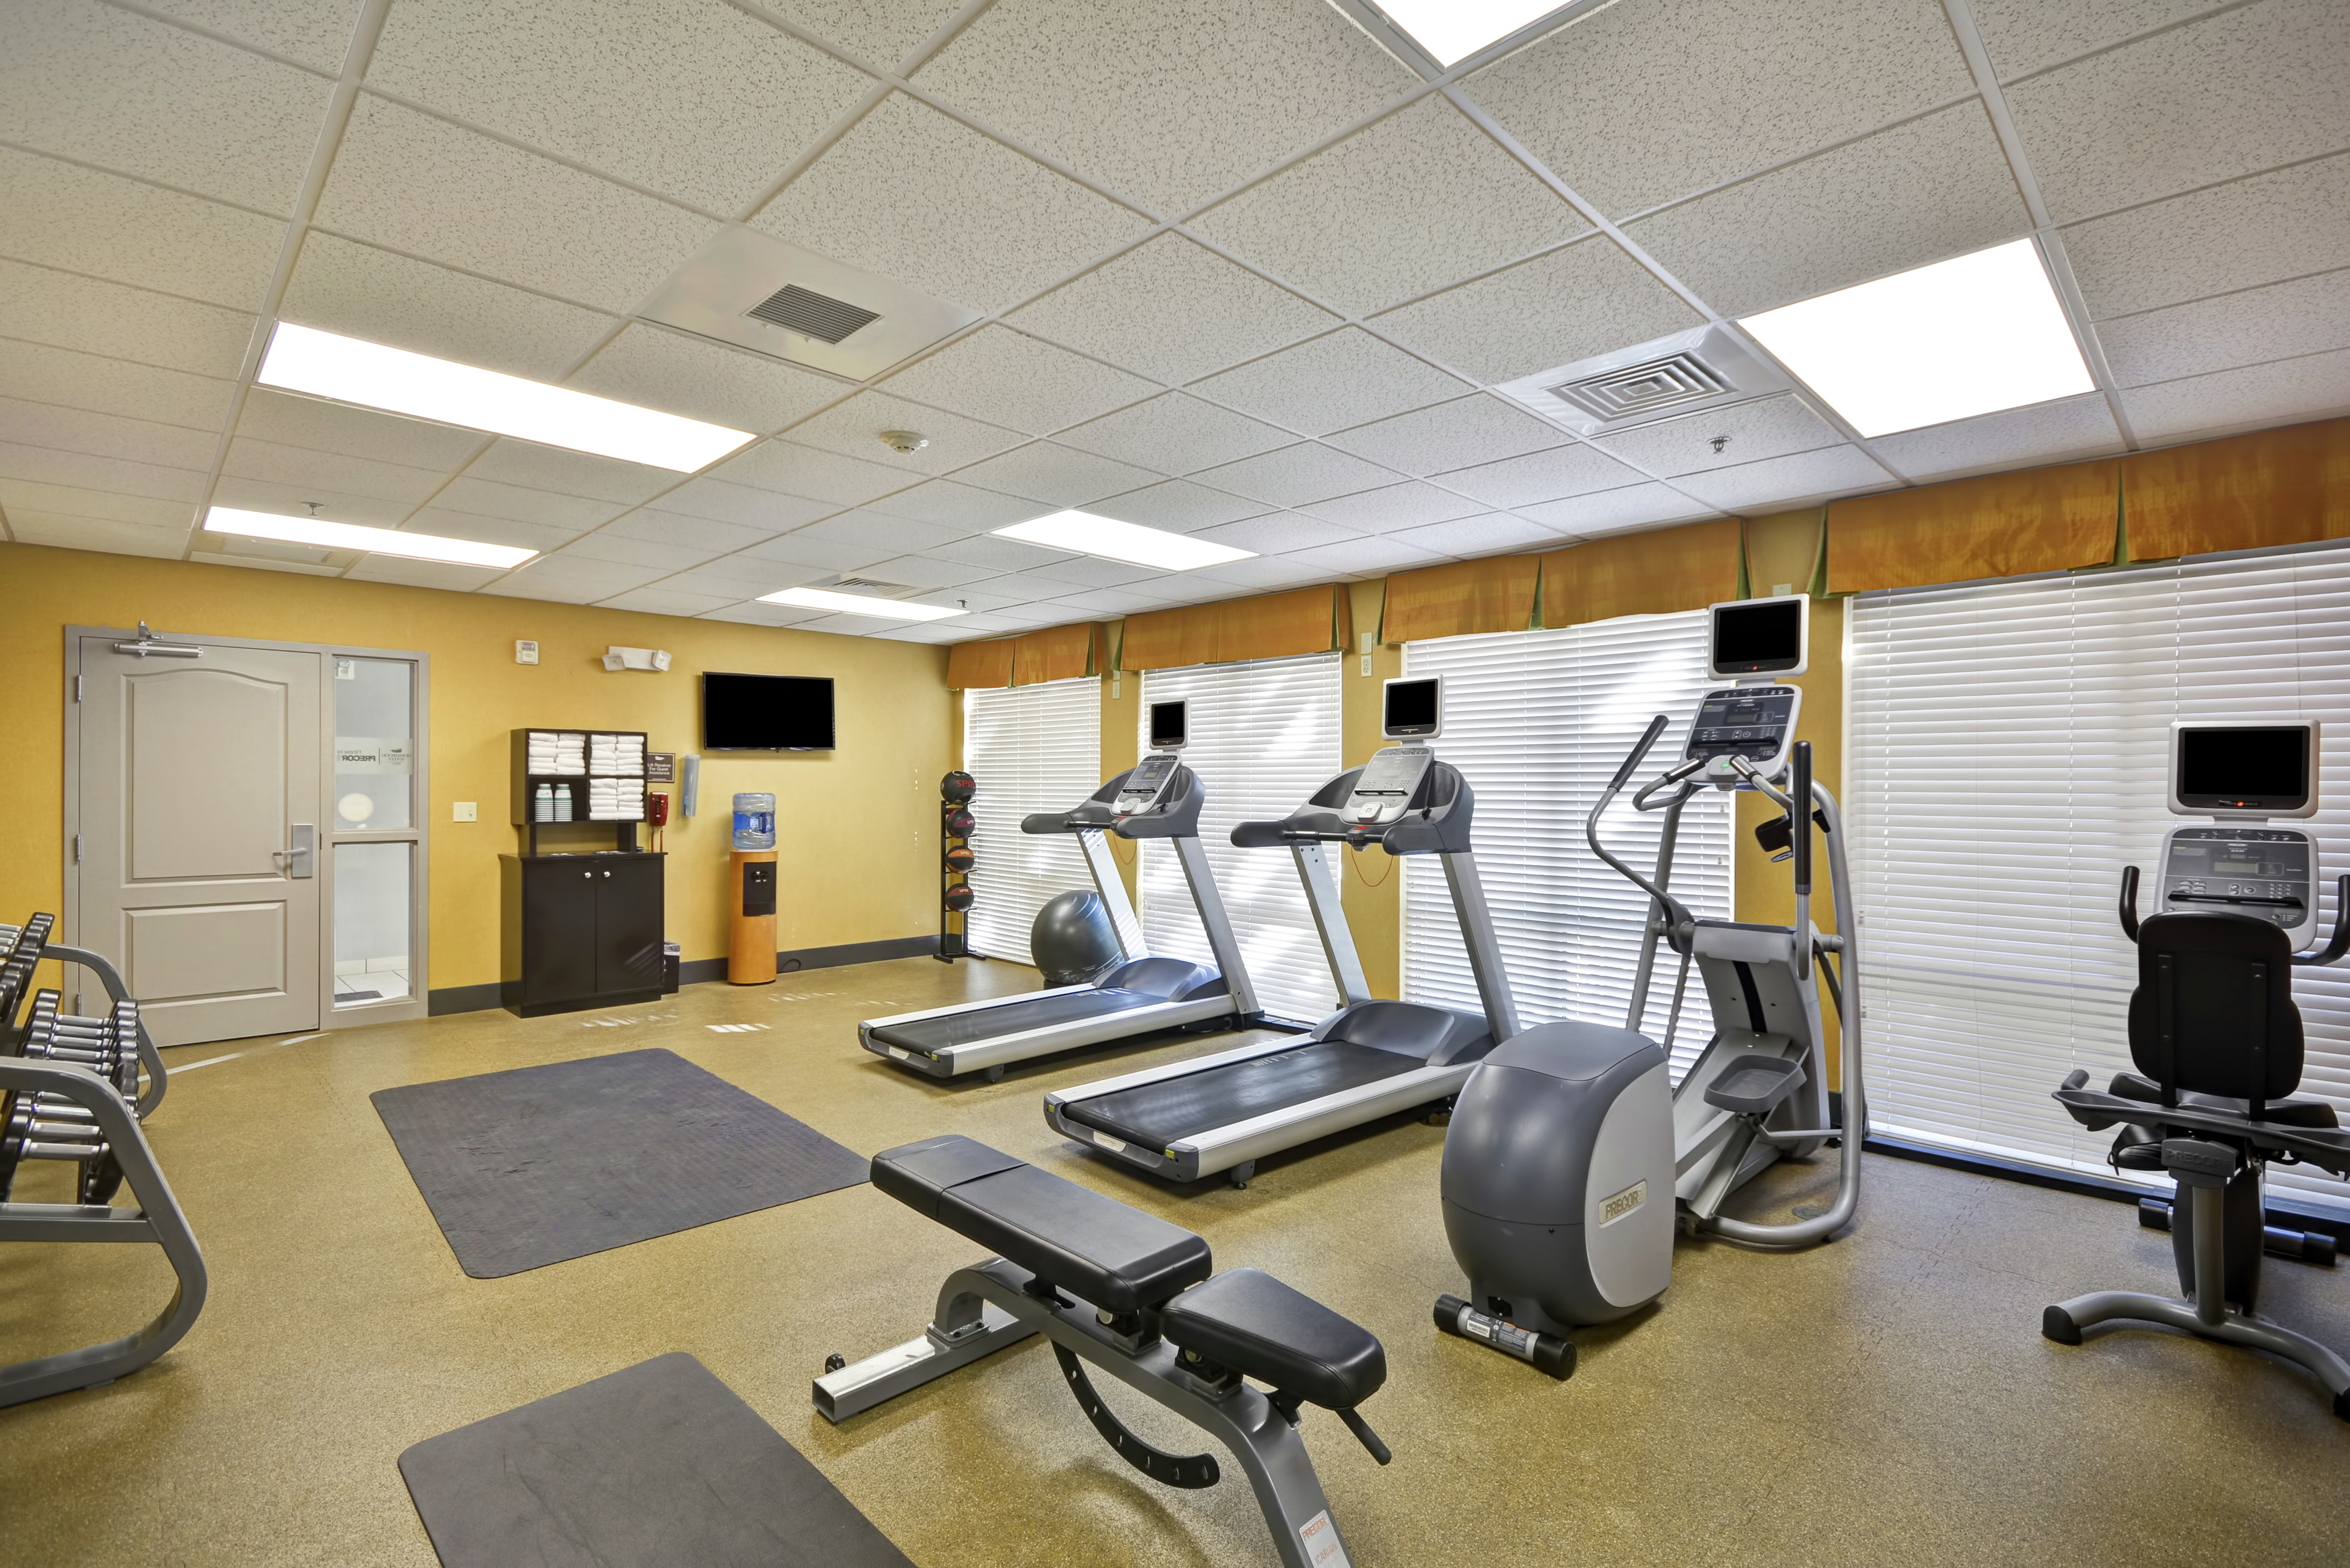 Fitness Center With Entry, Towel Station, Water Cooler, TV, Weight Balls, Stability Ball, Cardio Equipment, Weight Bench, and Free Weights